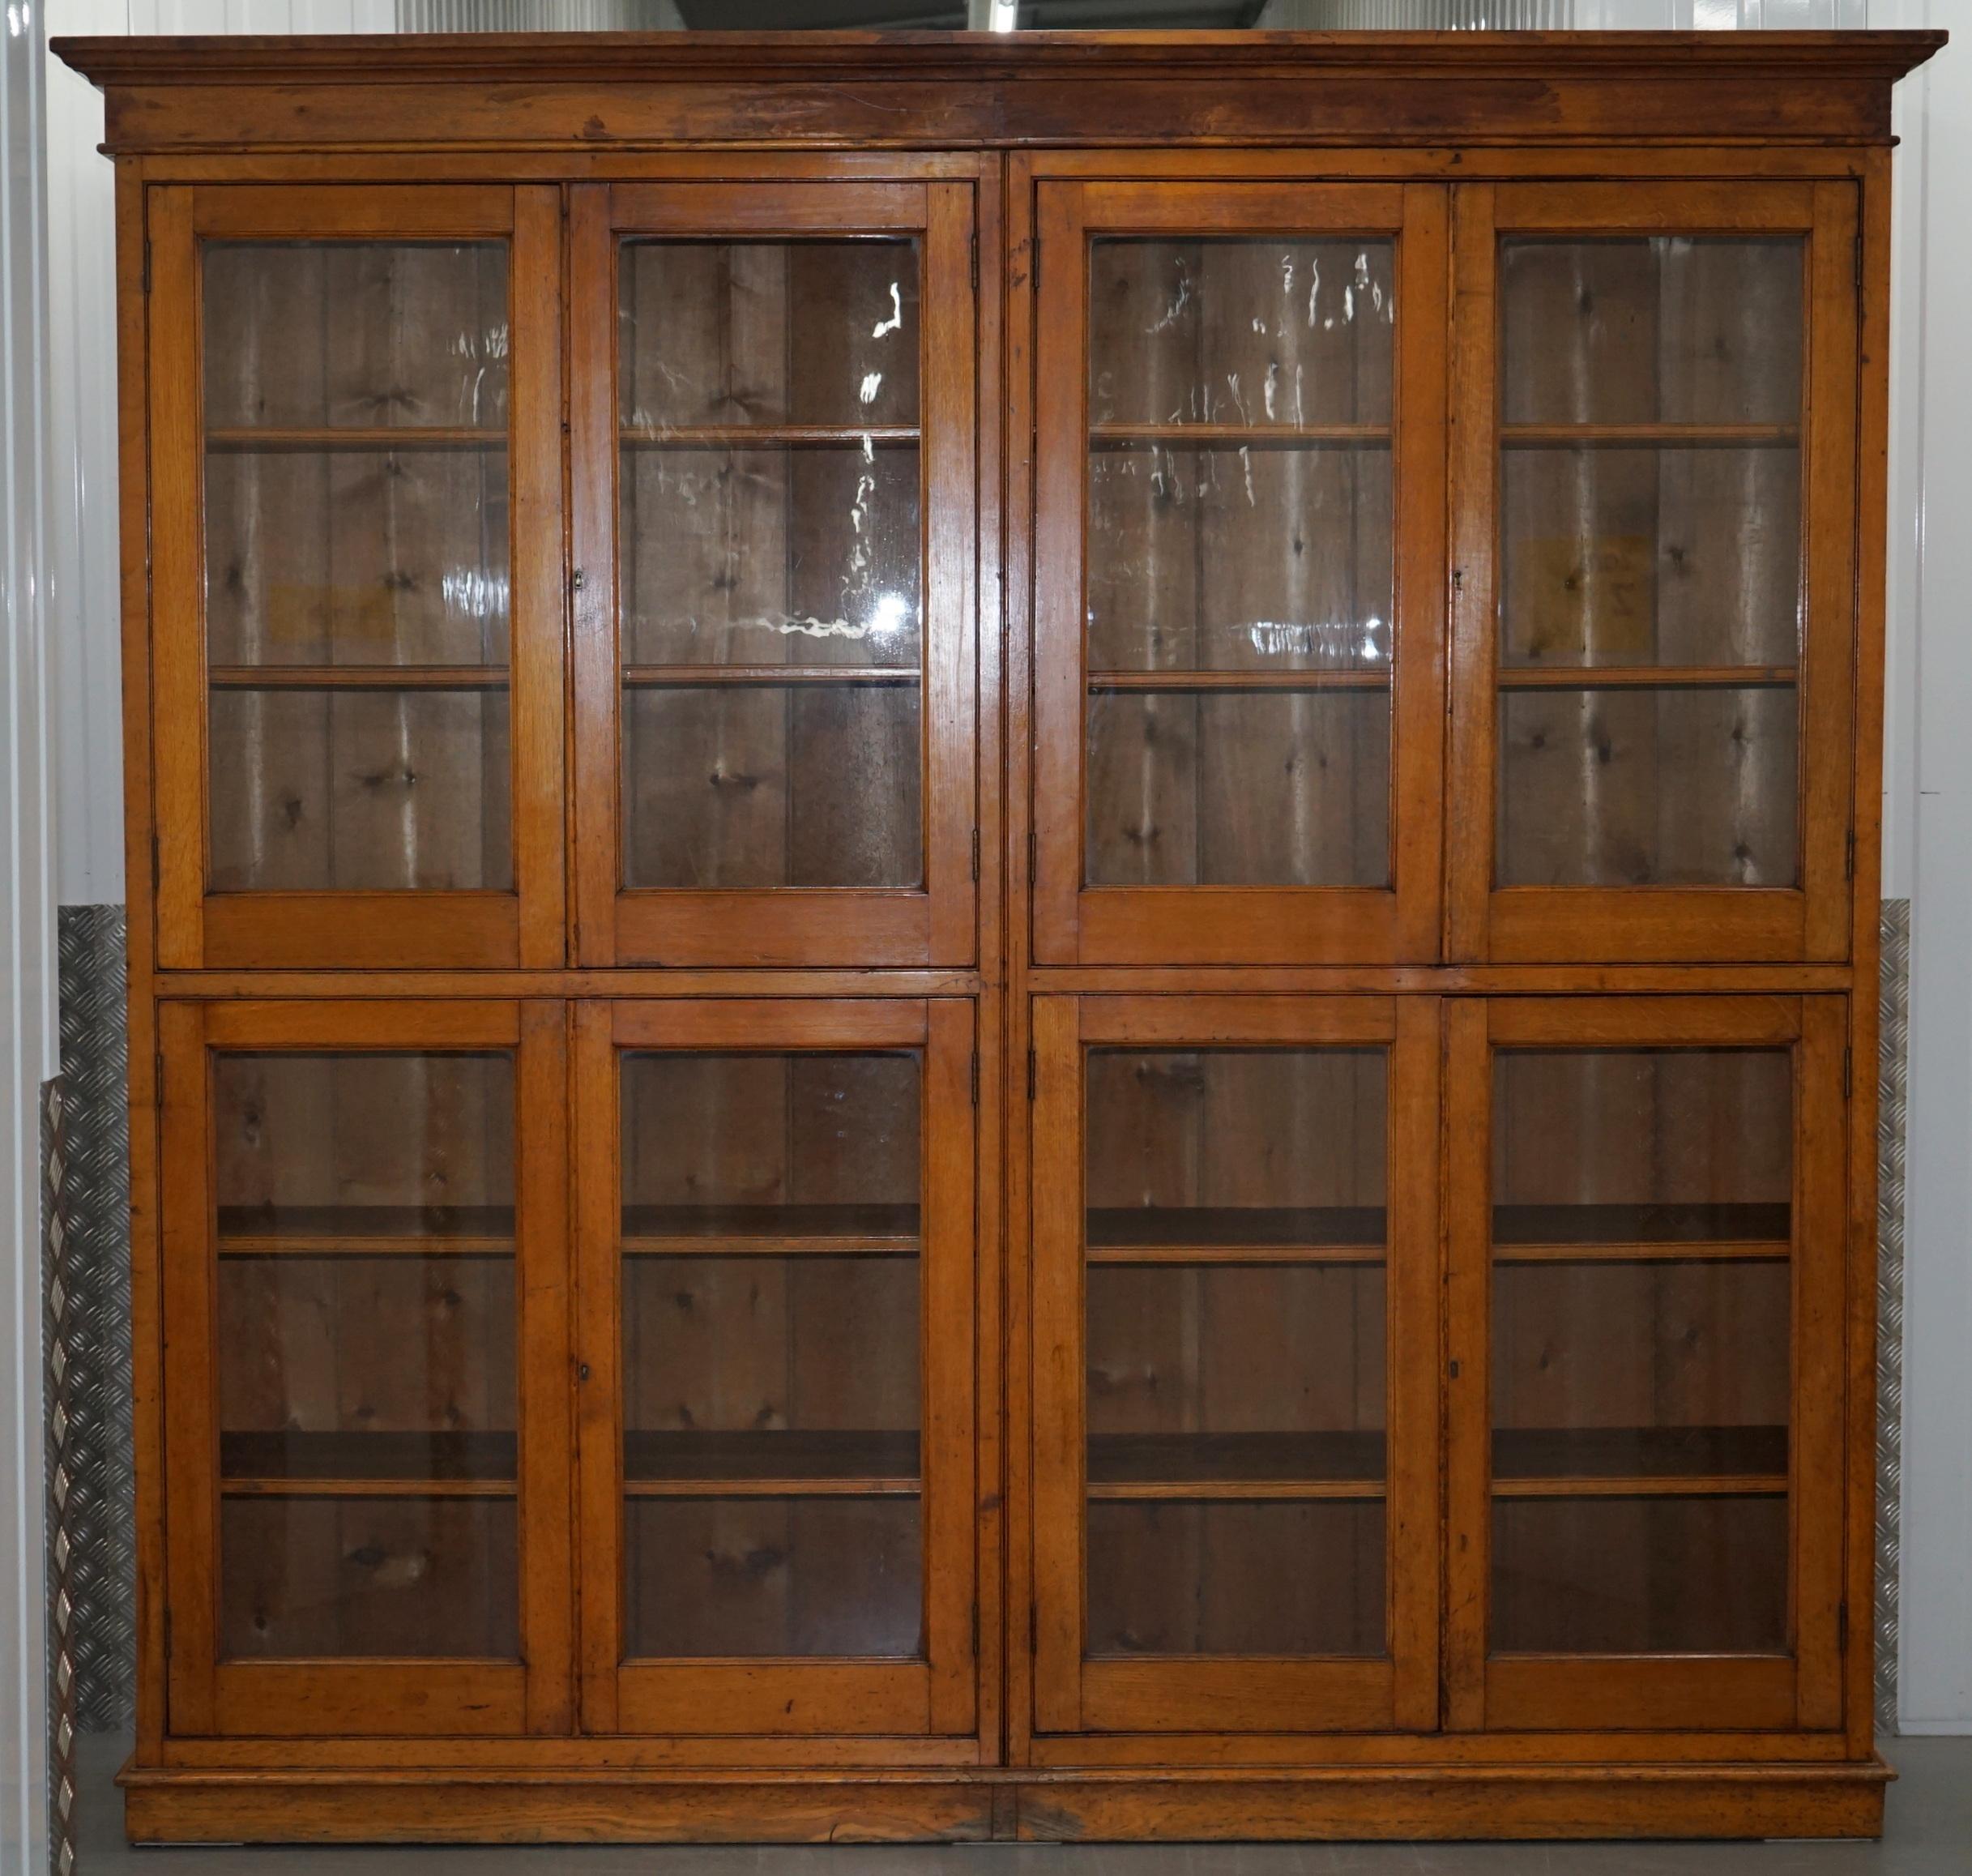 We are delighted to offer for sale this absolutely stunning very grand Victorian Library bookcase cabinet with fully adjustable shelves

You can fit an entire library in here, this piece is monumental, the shelves are all removable and height